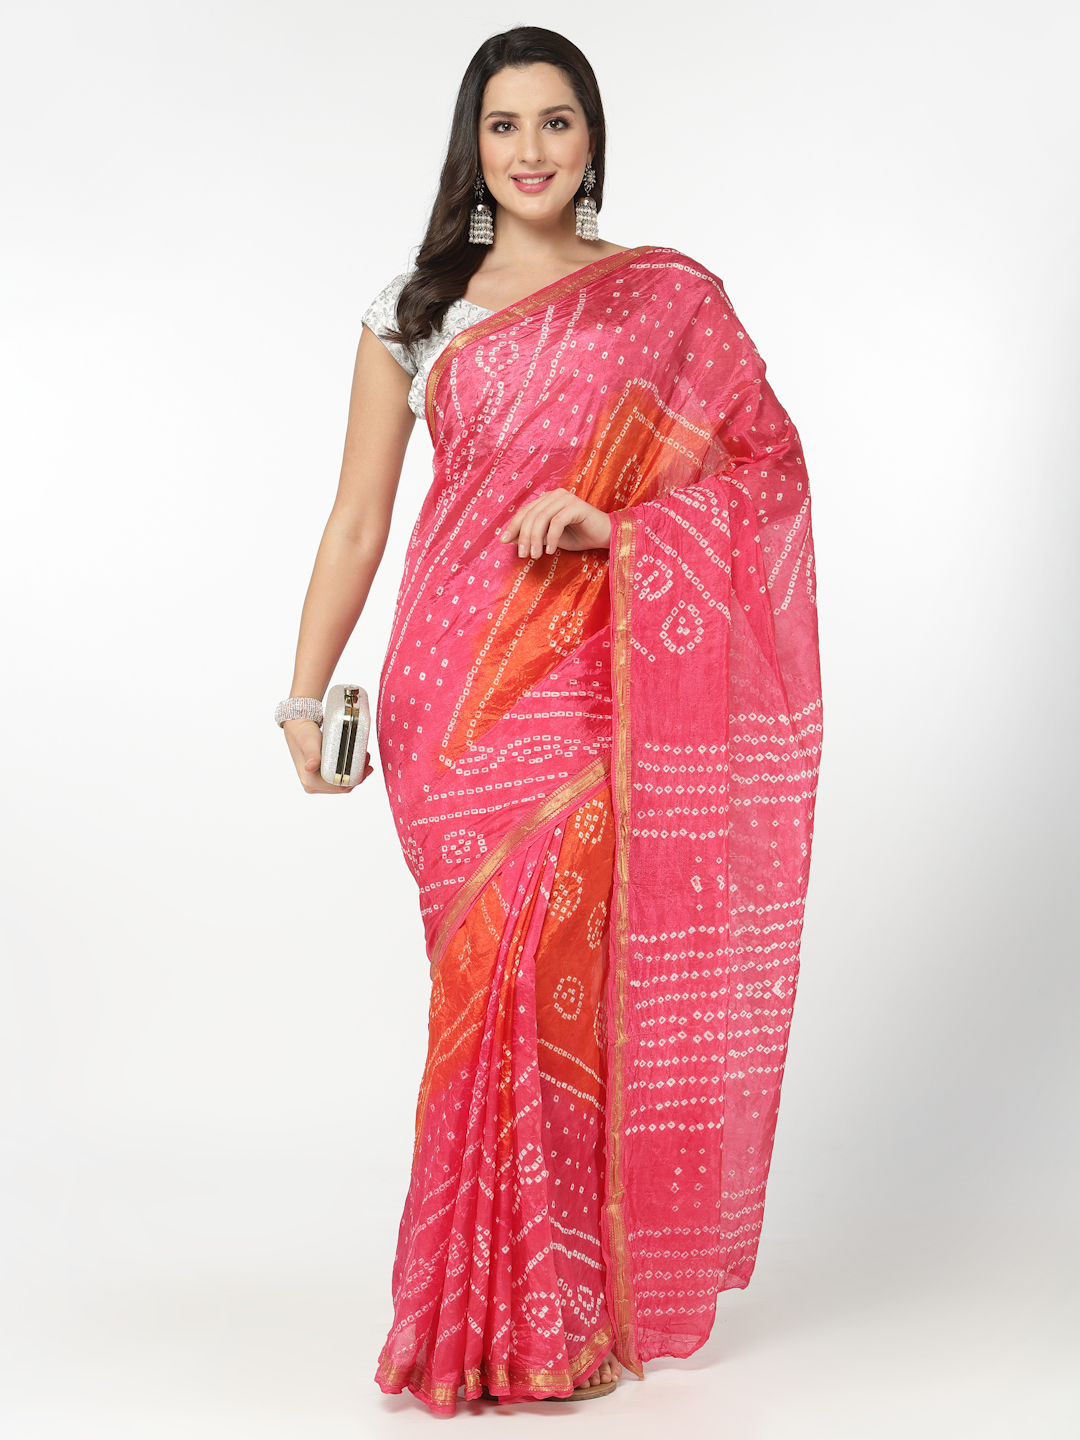 Women Silk Bandhani and Zari Weaving Saree with Unstitched Blouse - Pink And Orange